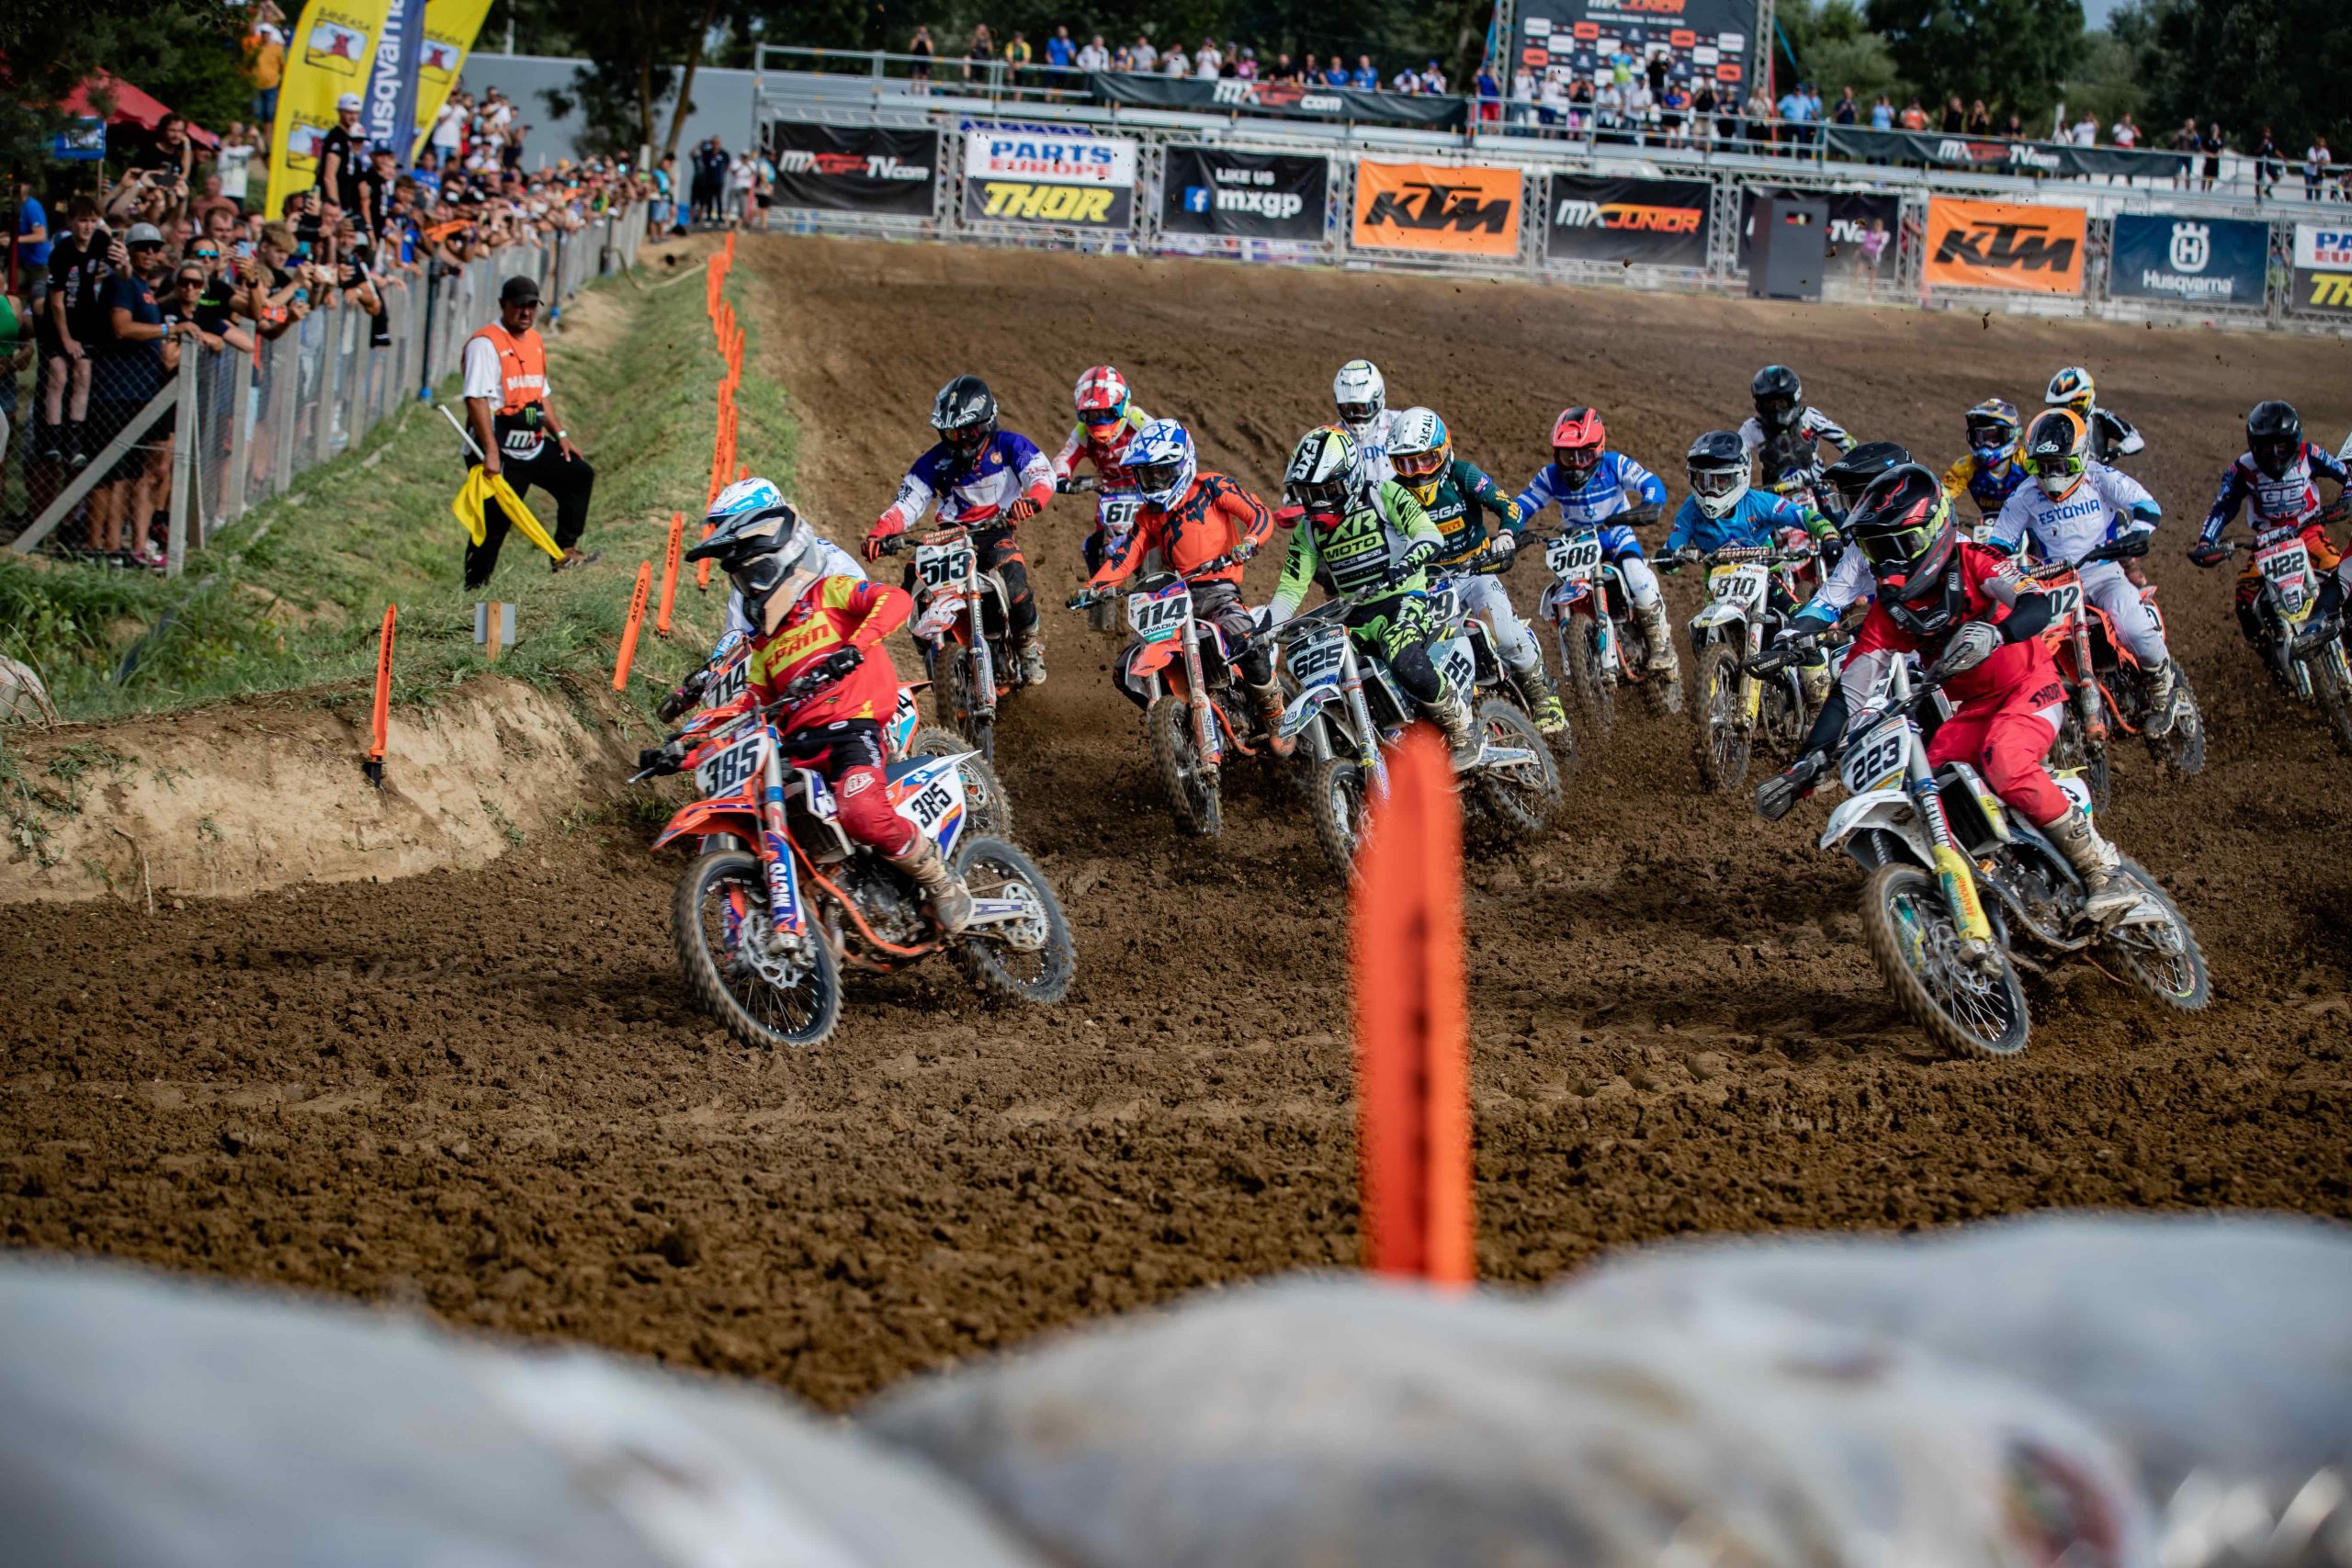 First day ends with the Qualifying session of the FIM Junior Motocross World Championship in Romania